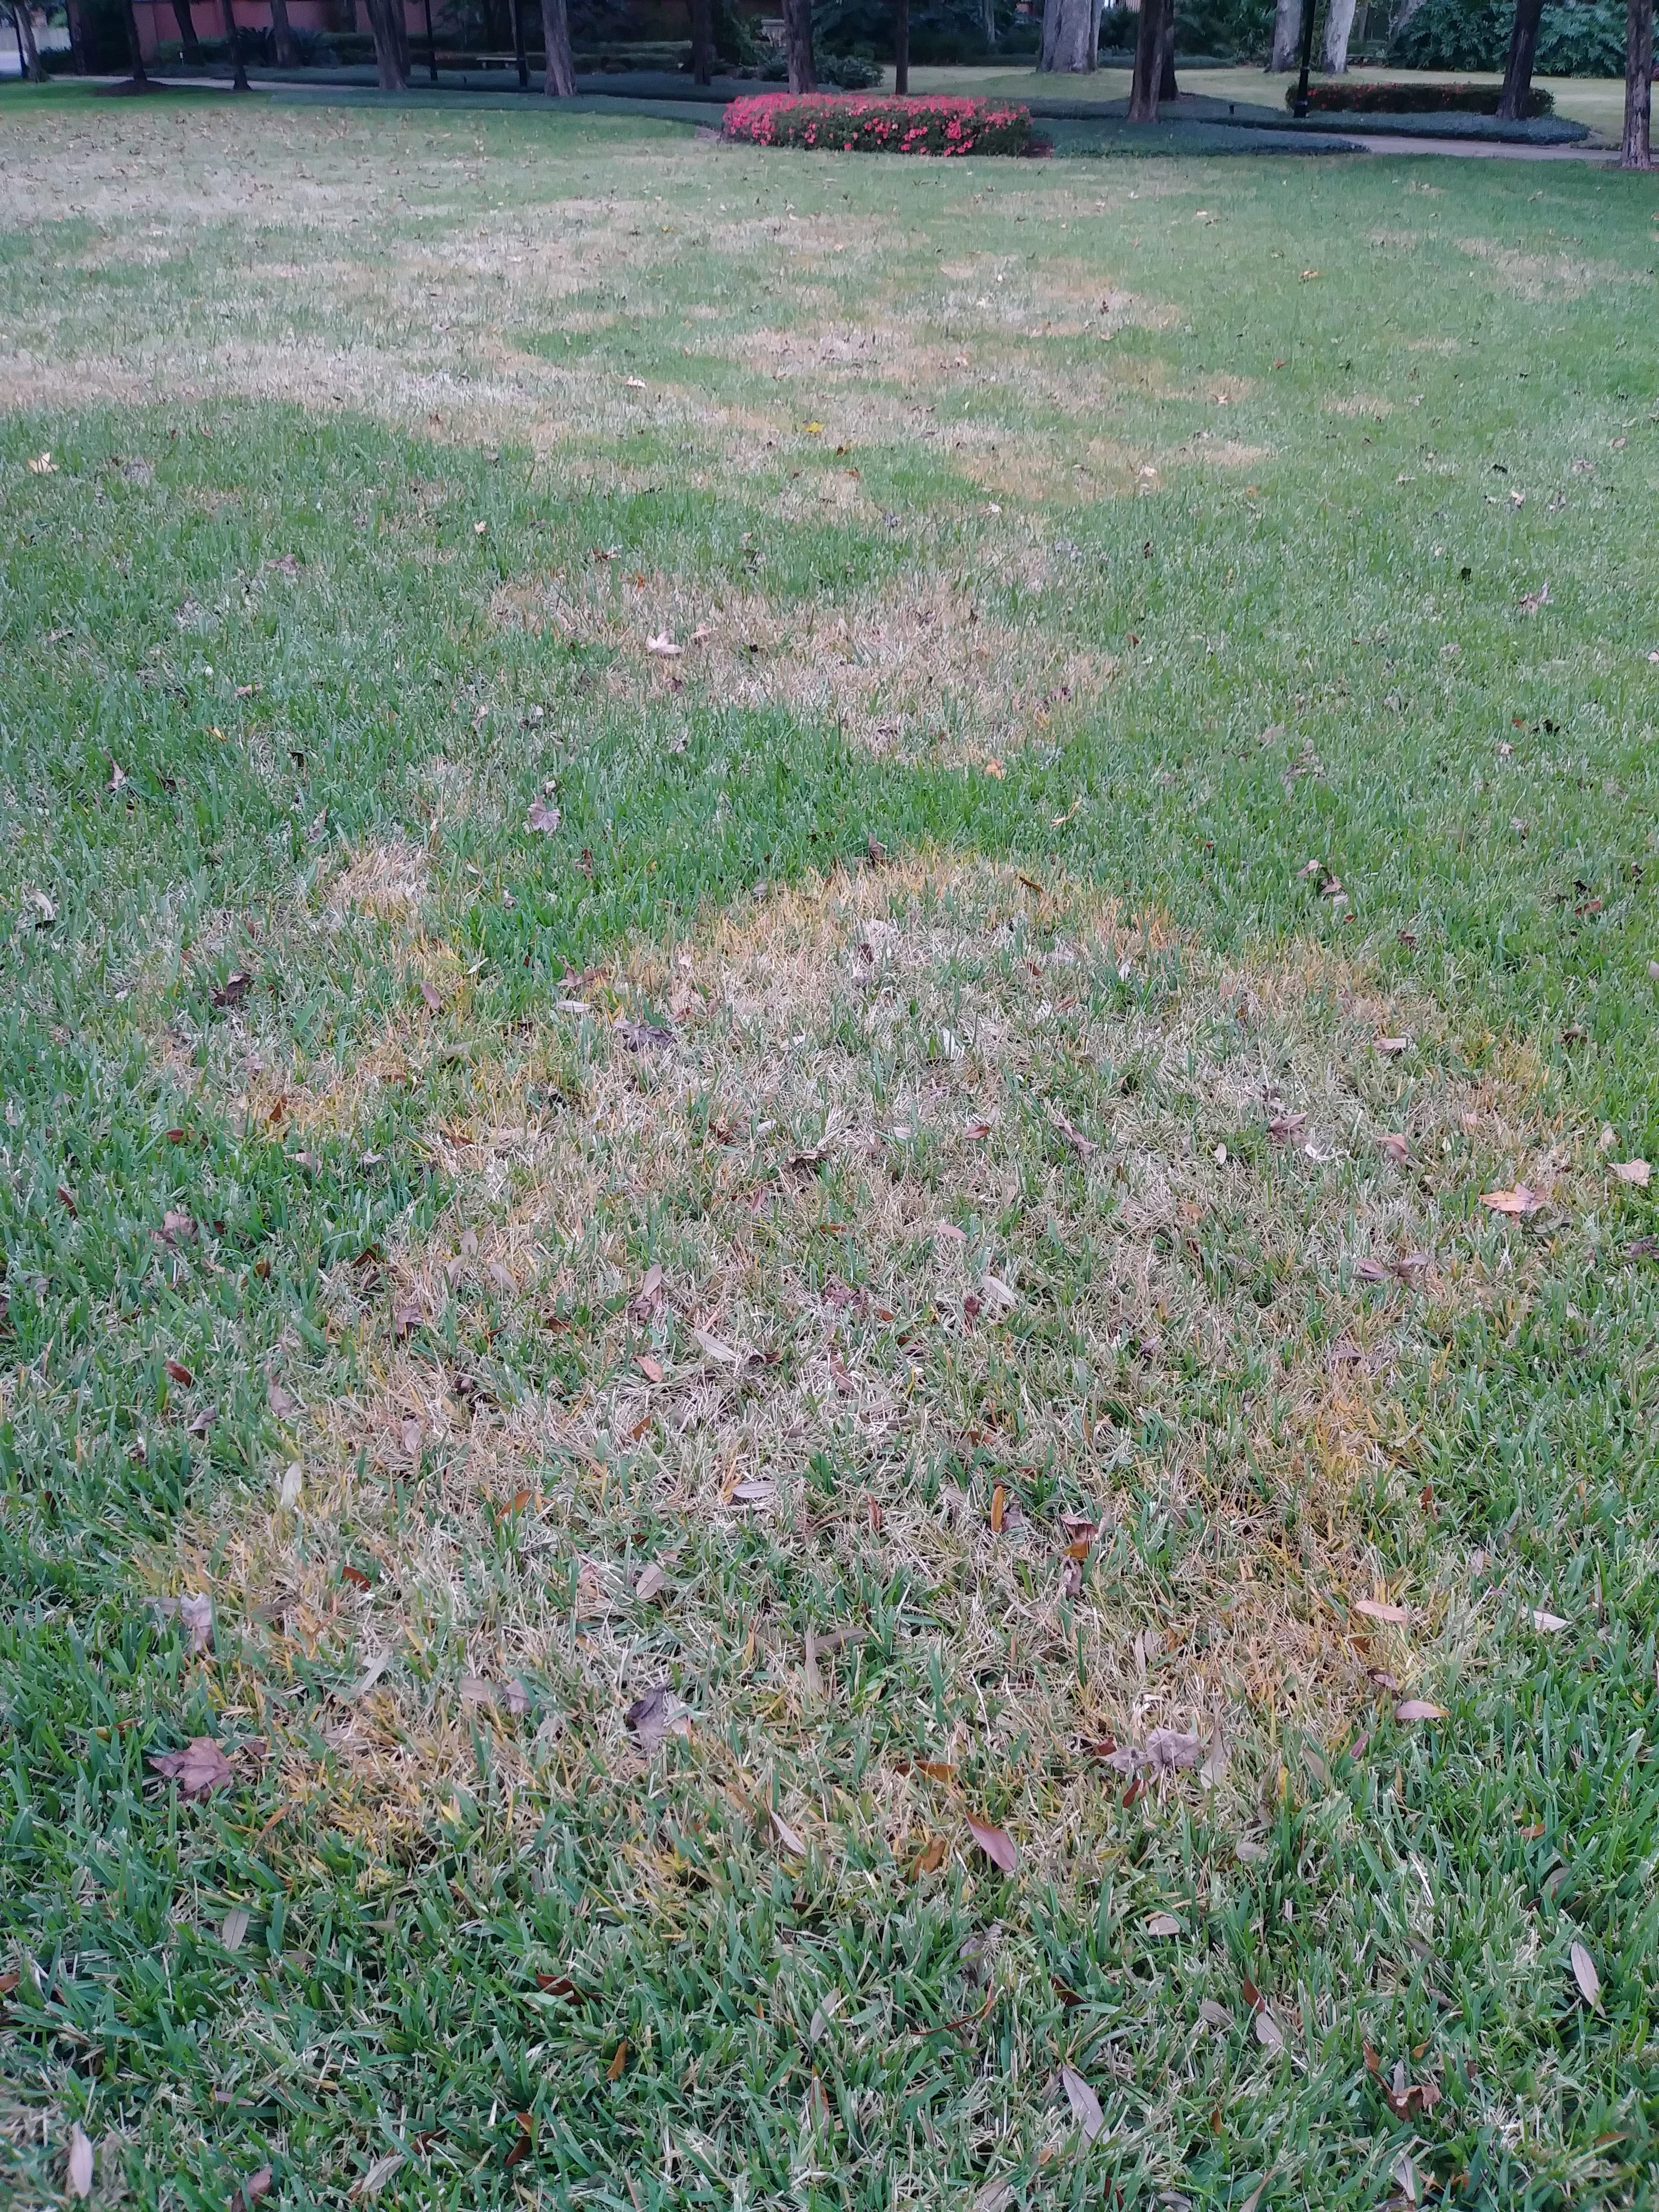 Those aren't crop circles in your lawn